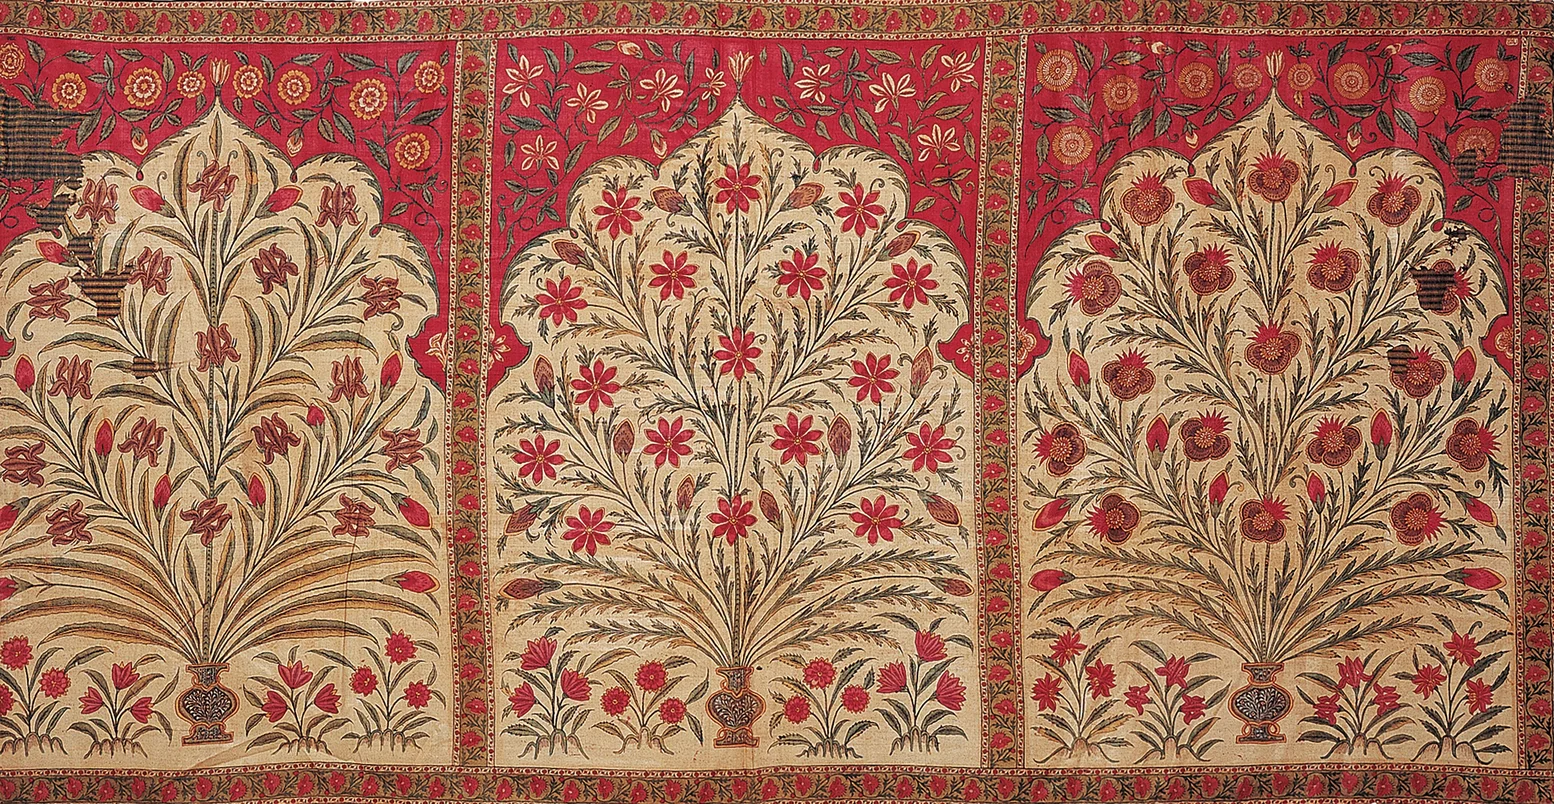 Intricate woven cloth split into three visual sections, each one with a border of red and yellow pattern, depicting an abstract vase of flowers against a red background.